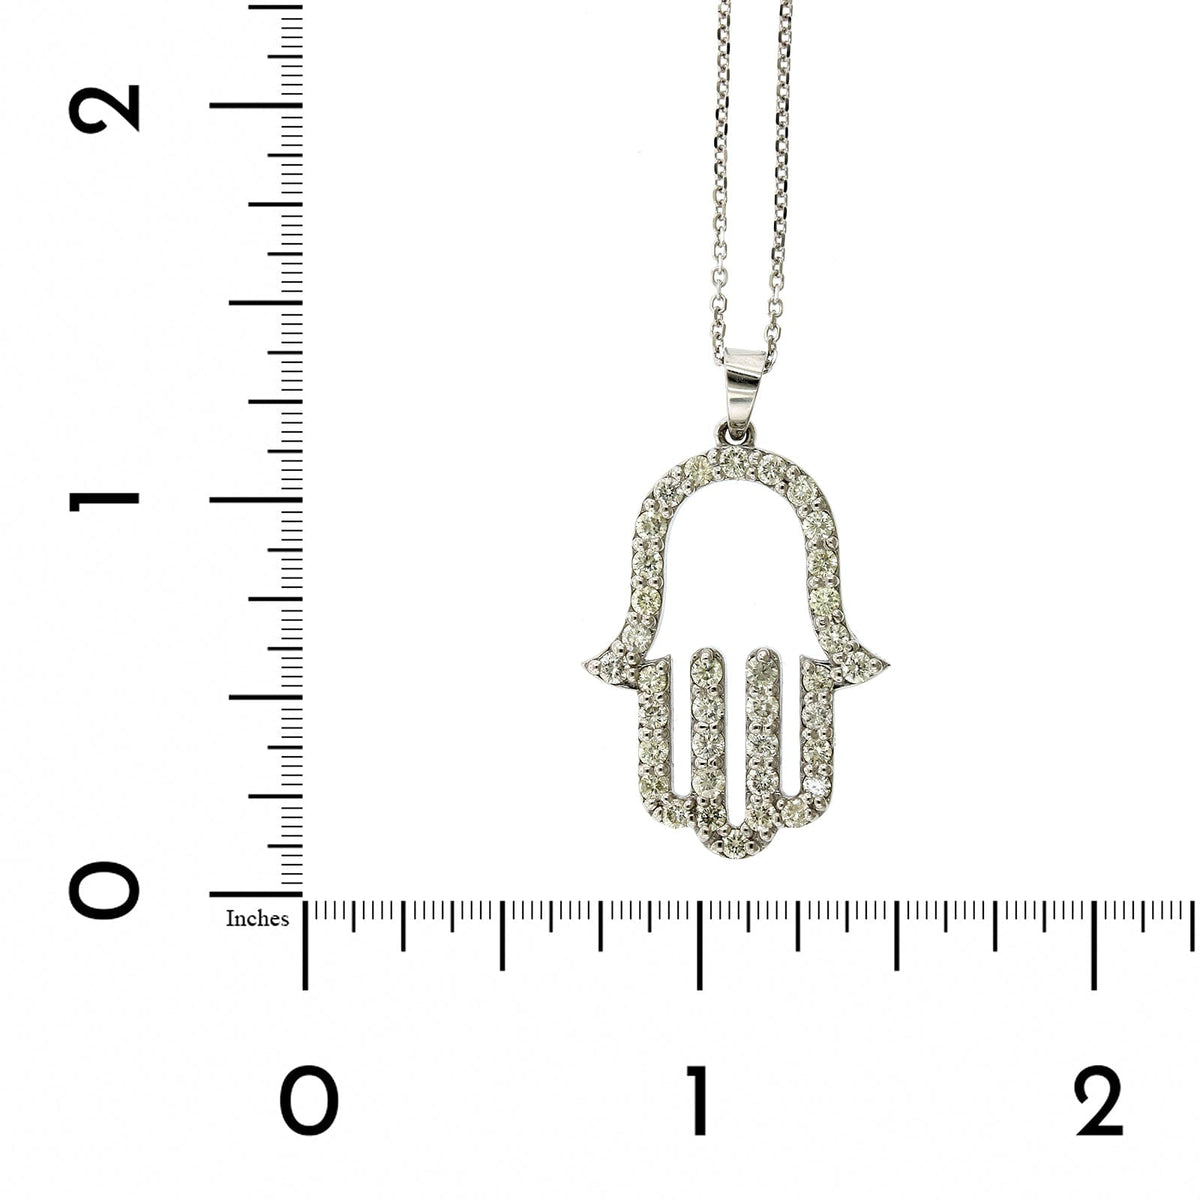 14K Gold Diamond Accented Hamsa on Flat Pearl Necklace Charm